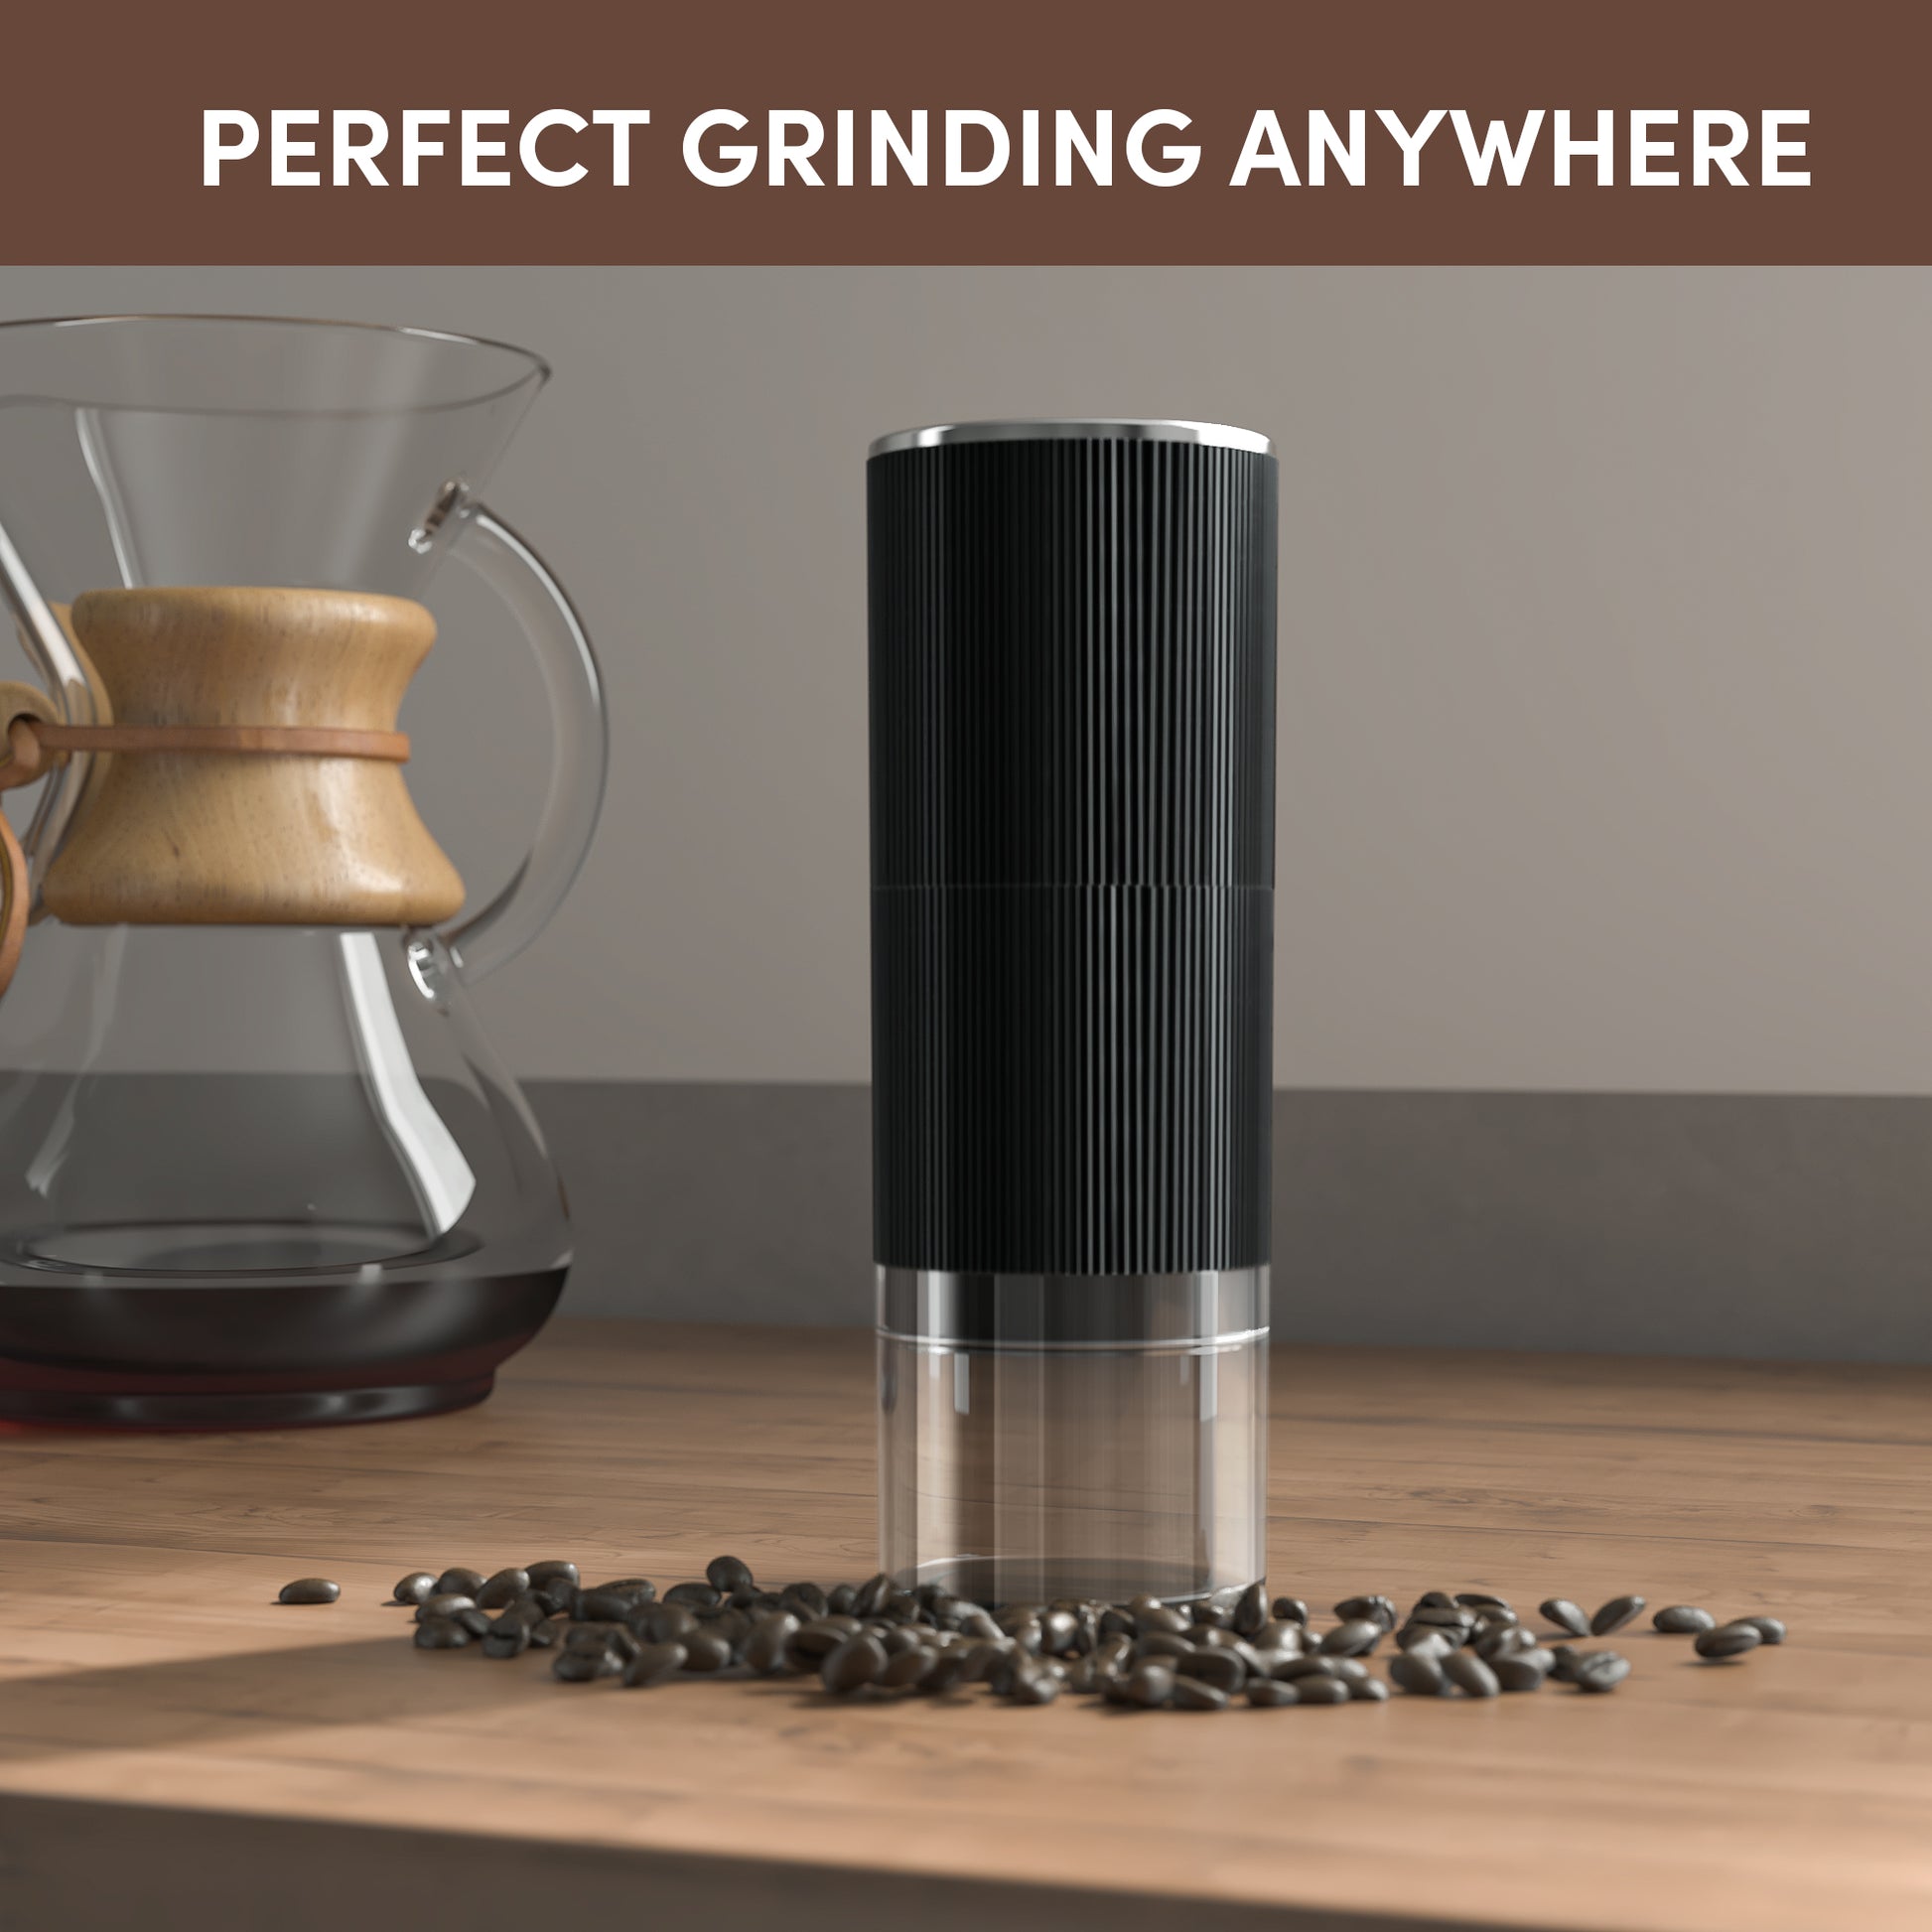 Wirsh The MillMaster Slim Burr Coffee Grinder-Rechargeable Battery Operated Coffee Grinder with Stainless Steel Conical Burr Set